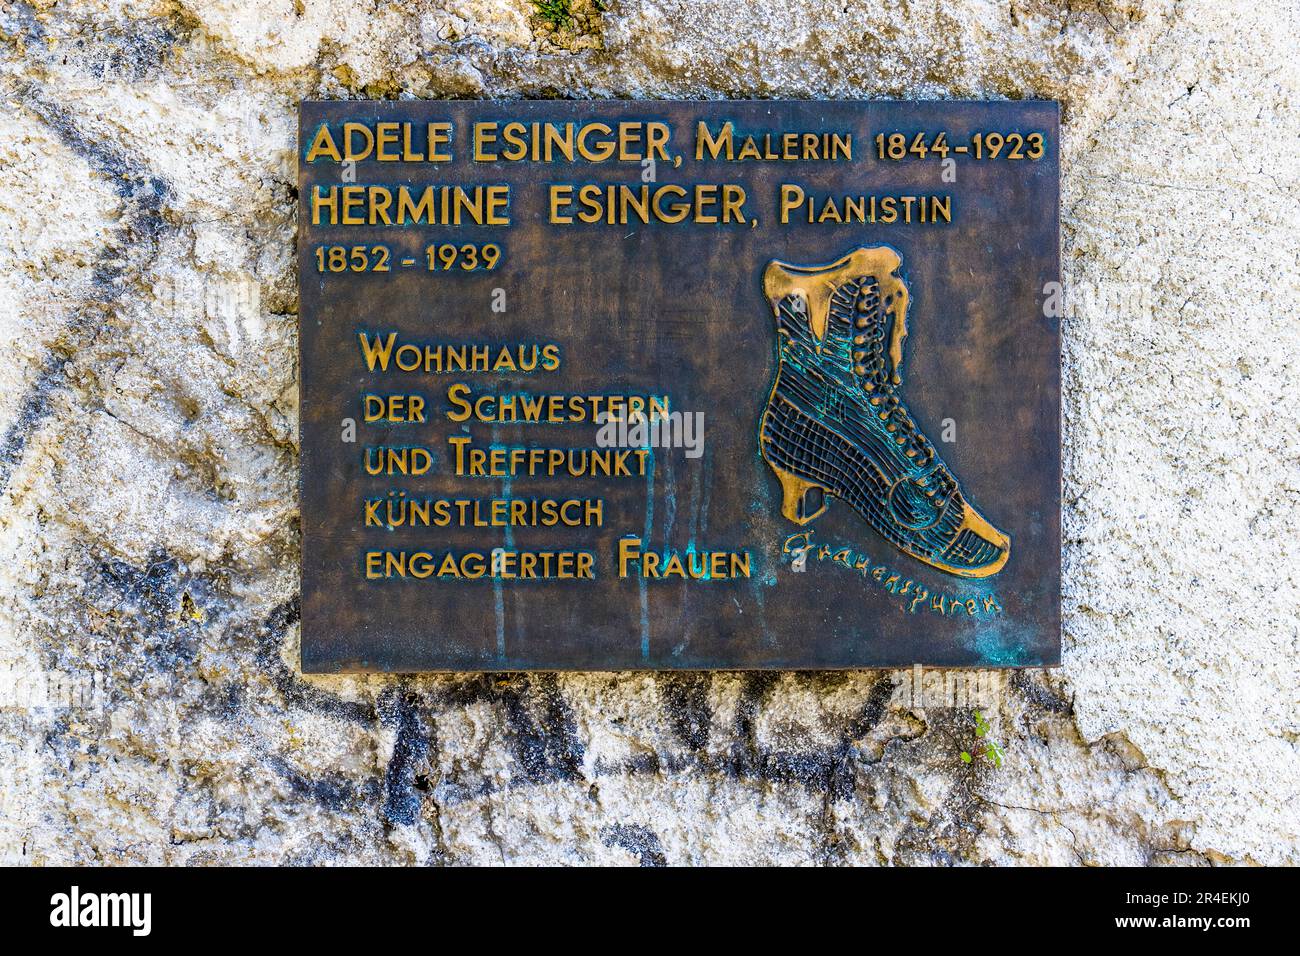 Plaque at the place where the sisters Adele Esinger (painter 1844 - 1923) and Hermine Esinger (pianist 1852 - 1939) lived and worked. Traces of women in Salzburg, Austria Stock Photo